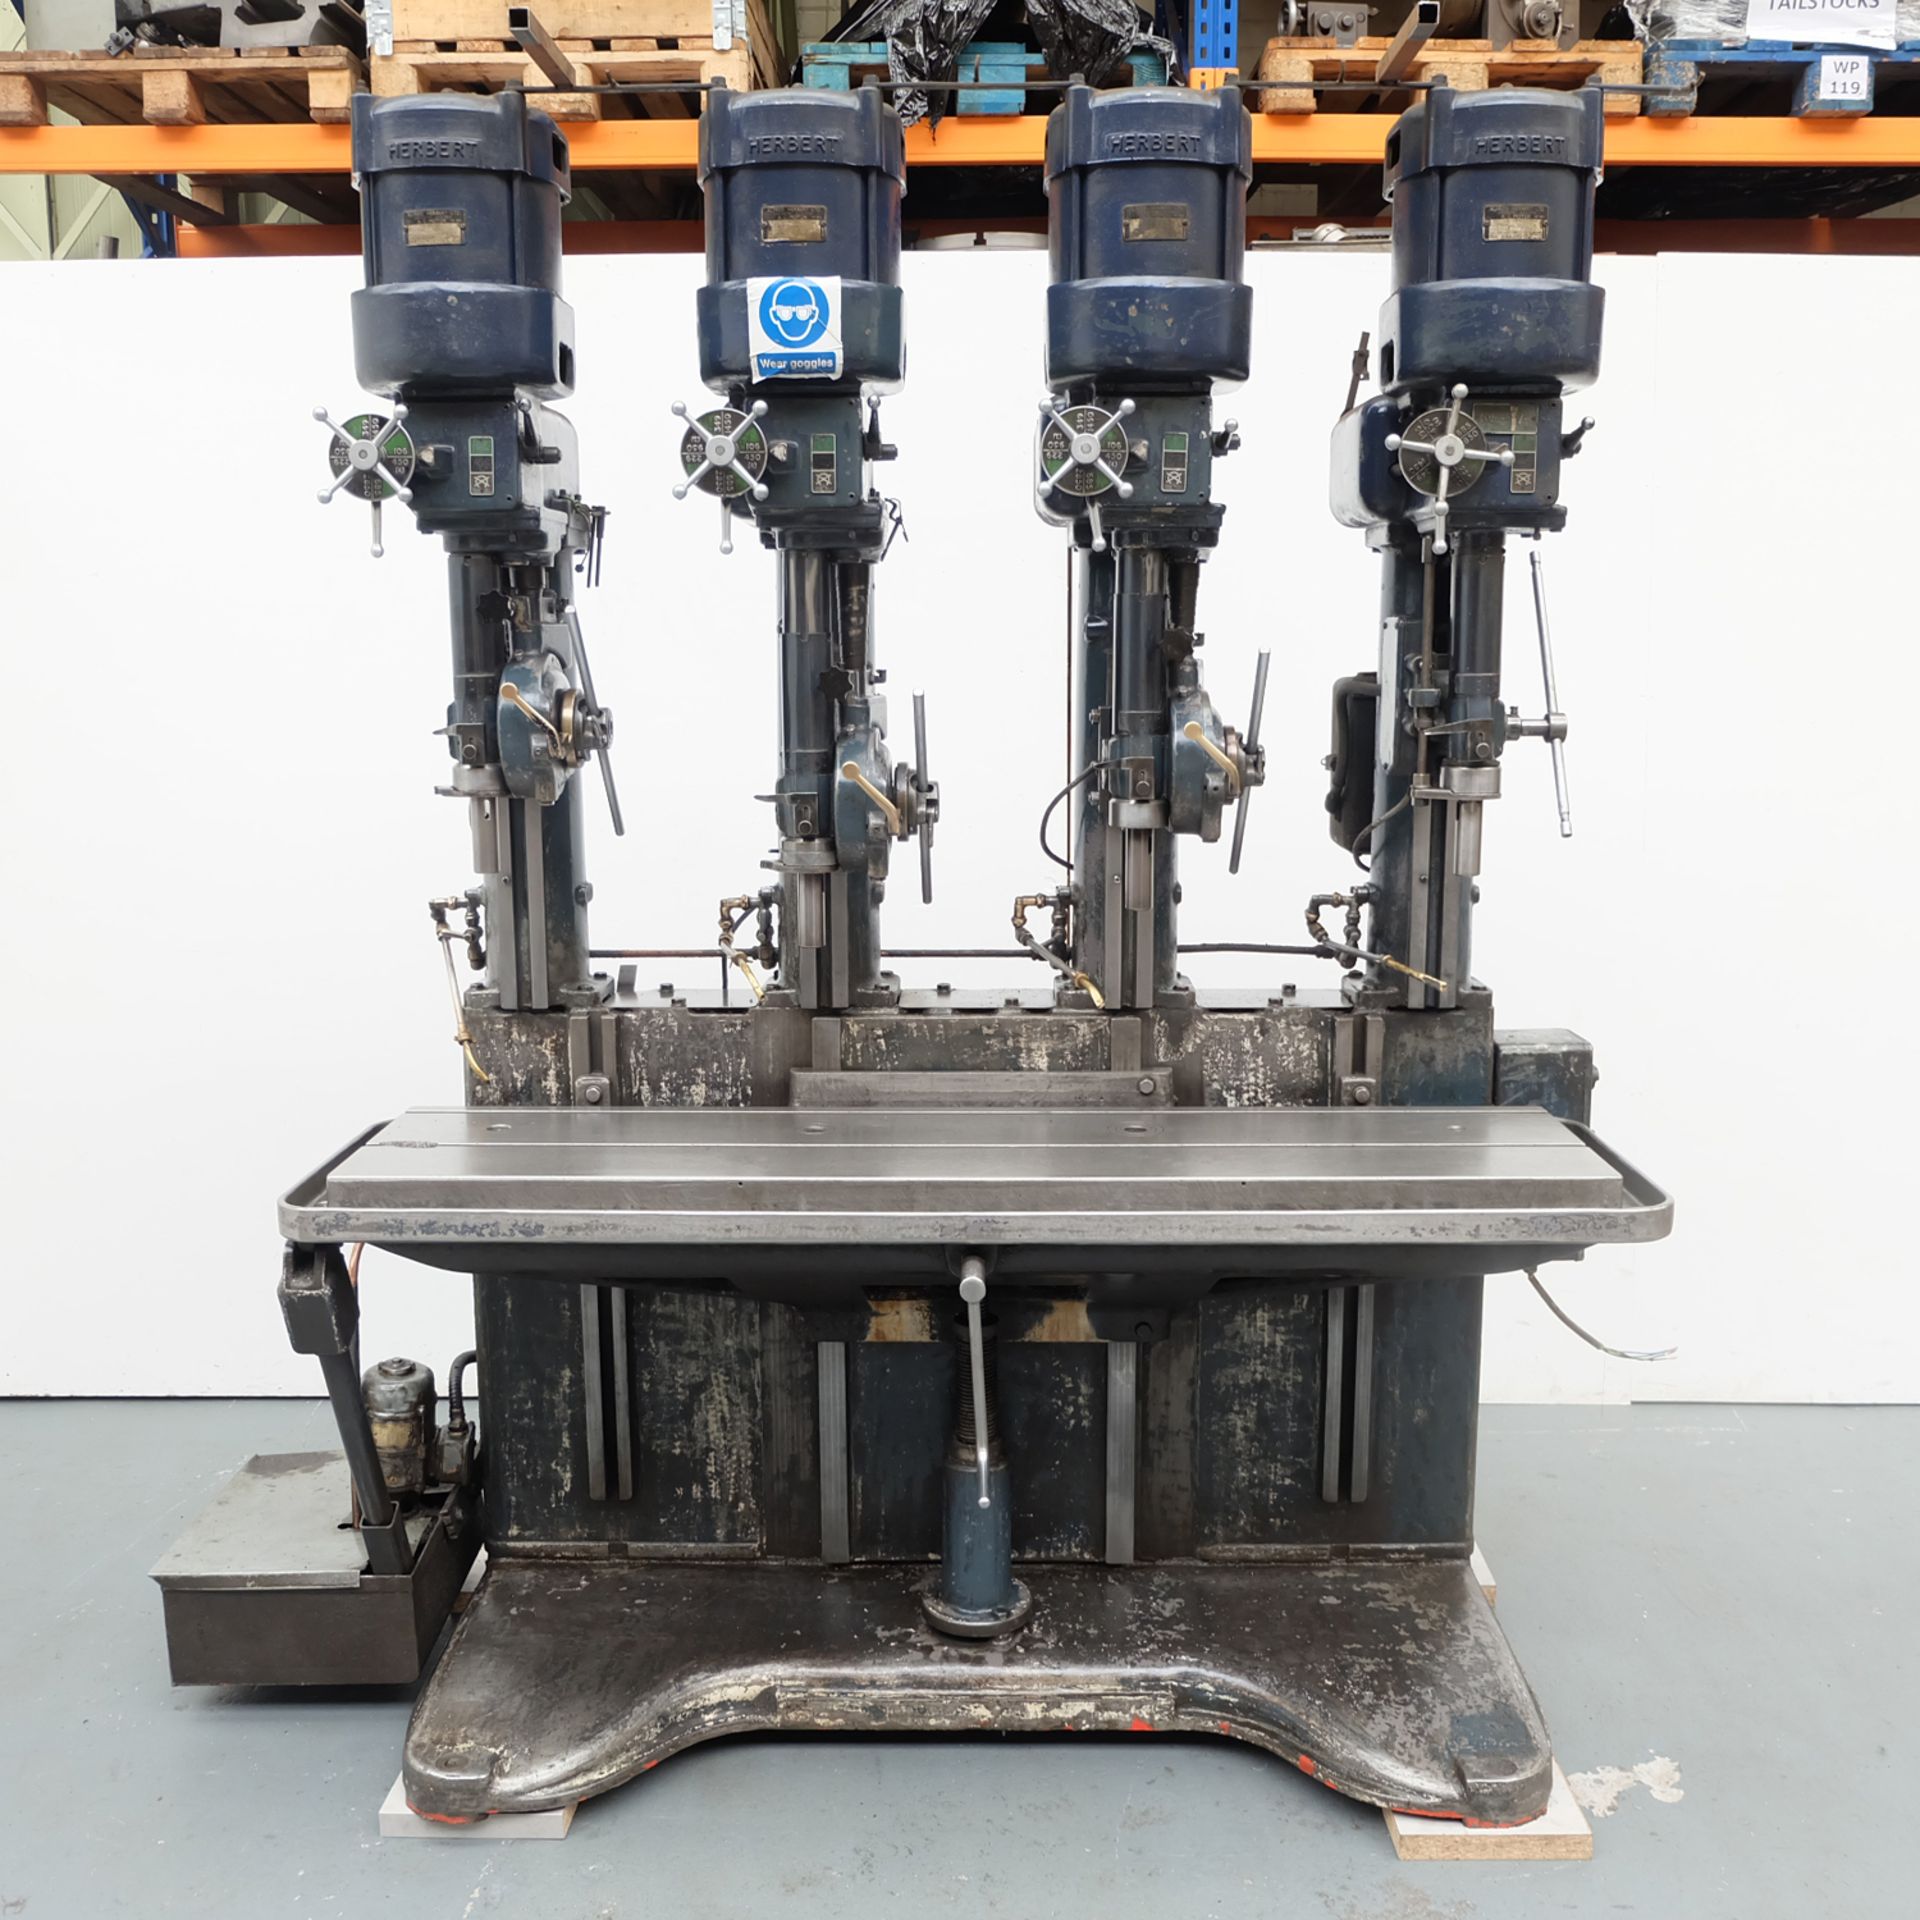 Herbert 4 Spindle Drilling Machine. Table Size 68" x 15 1/2". Throat 7 1/2".